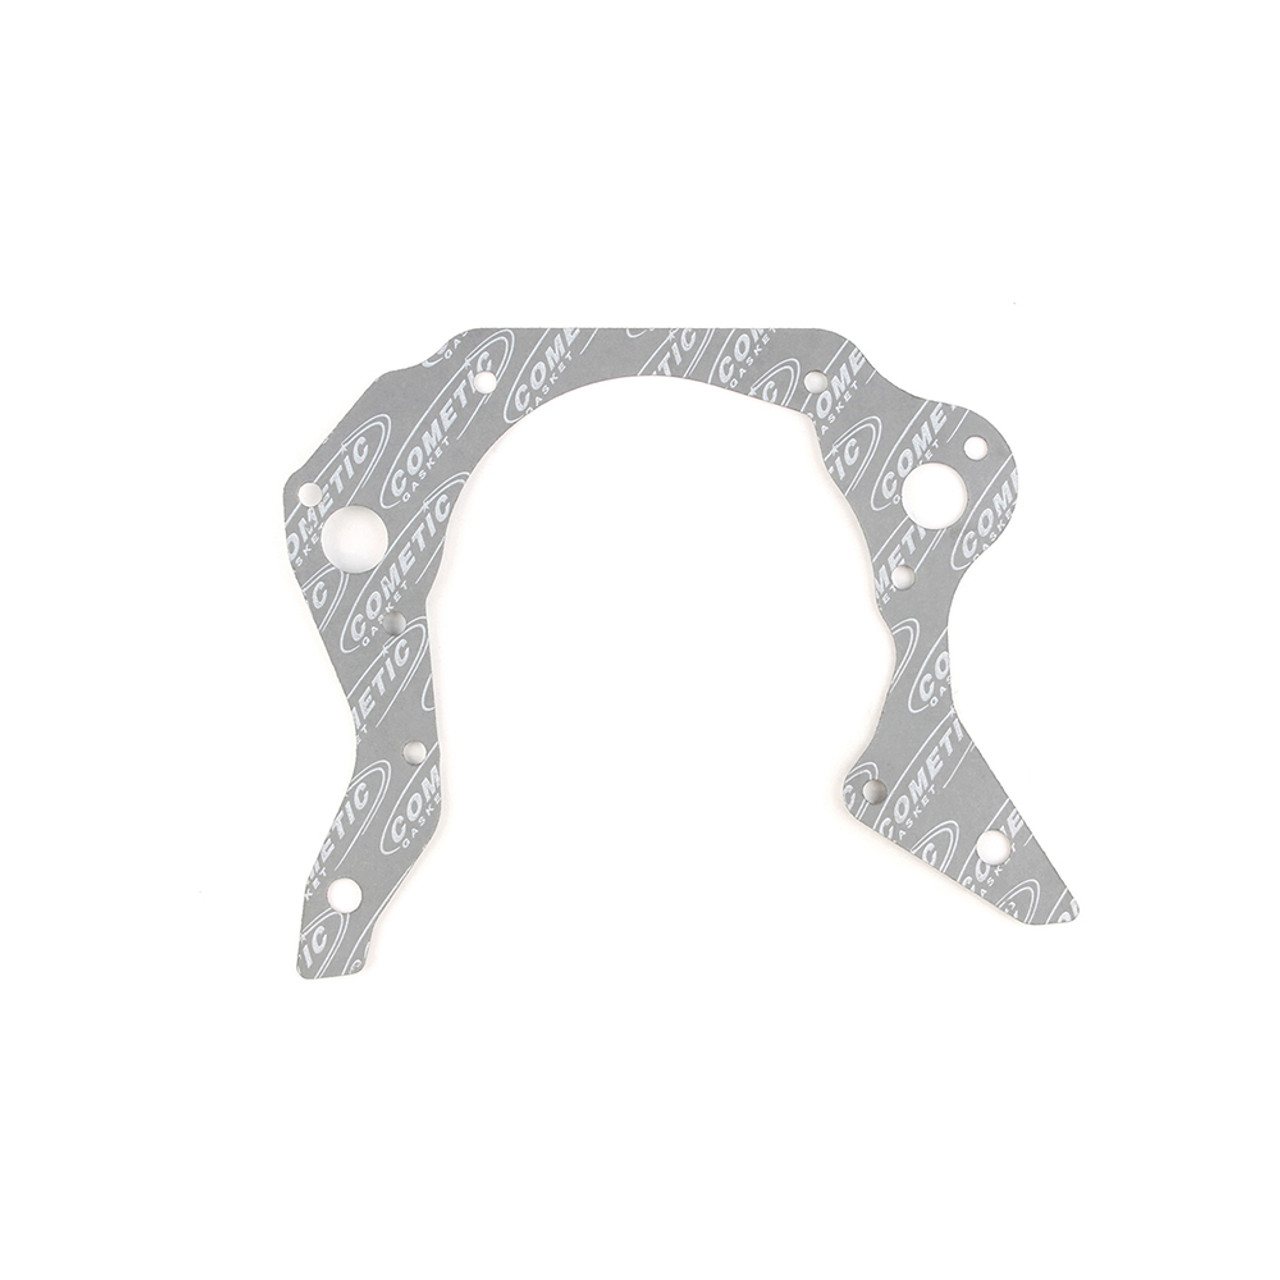 Cometic Timing Cover Gasket SBF 302/351W .031 Thick - CAGC5276-031